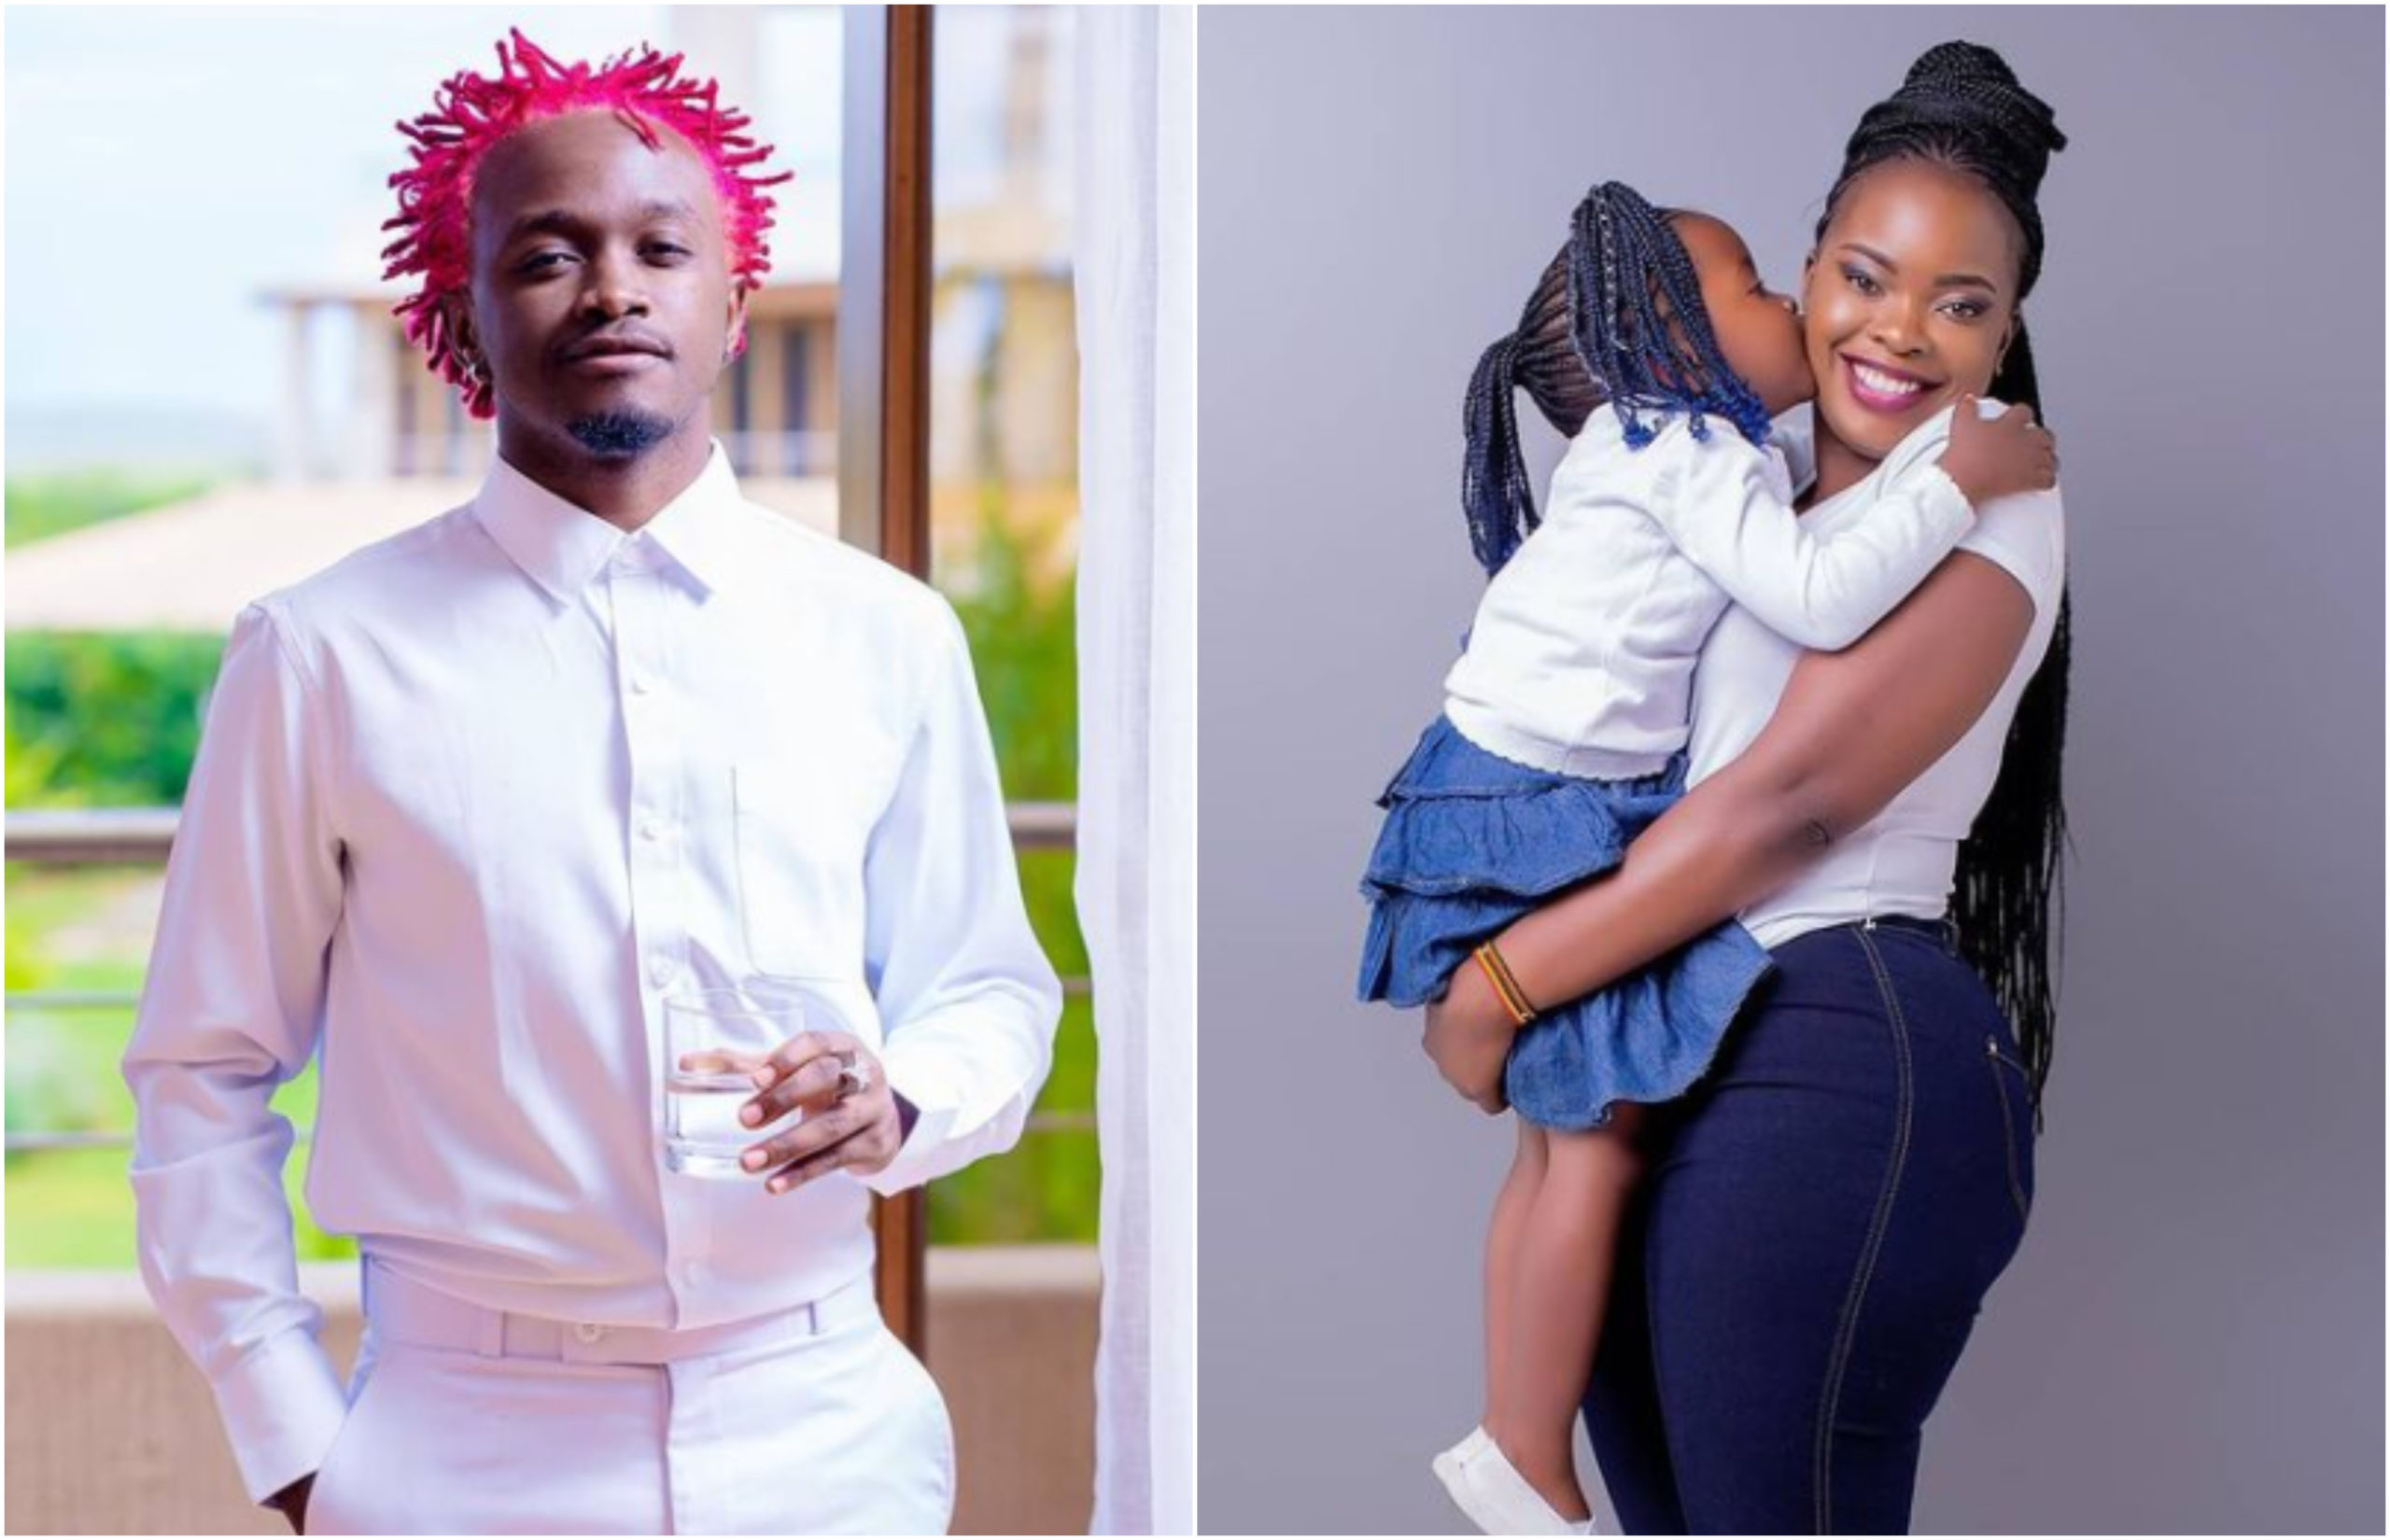 Blessings on Blessings! Bahati’s baby mama Yvette Obura flaunts her new ‘baby’ on social media(Photos)